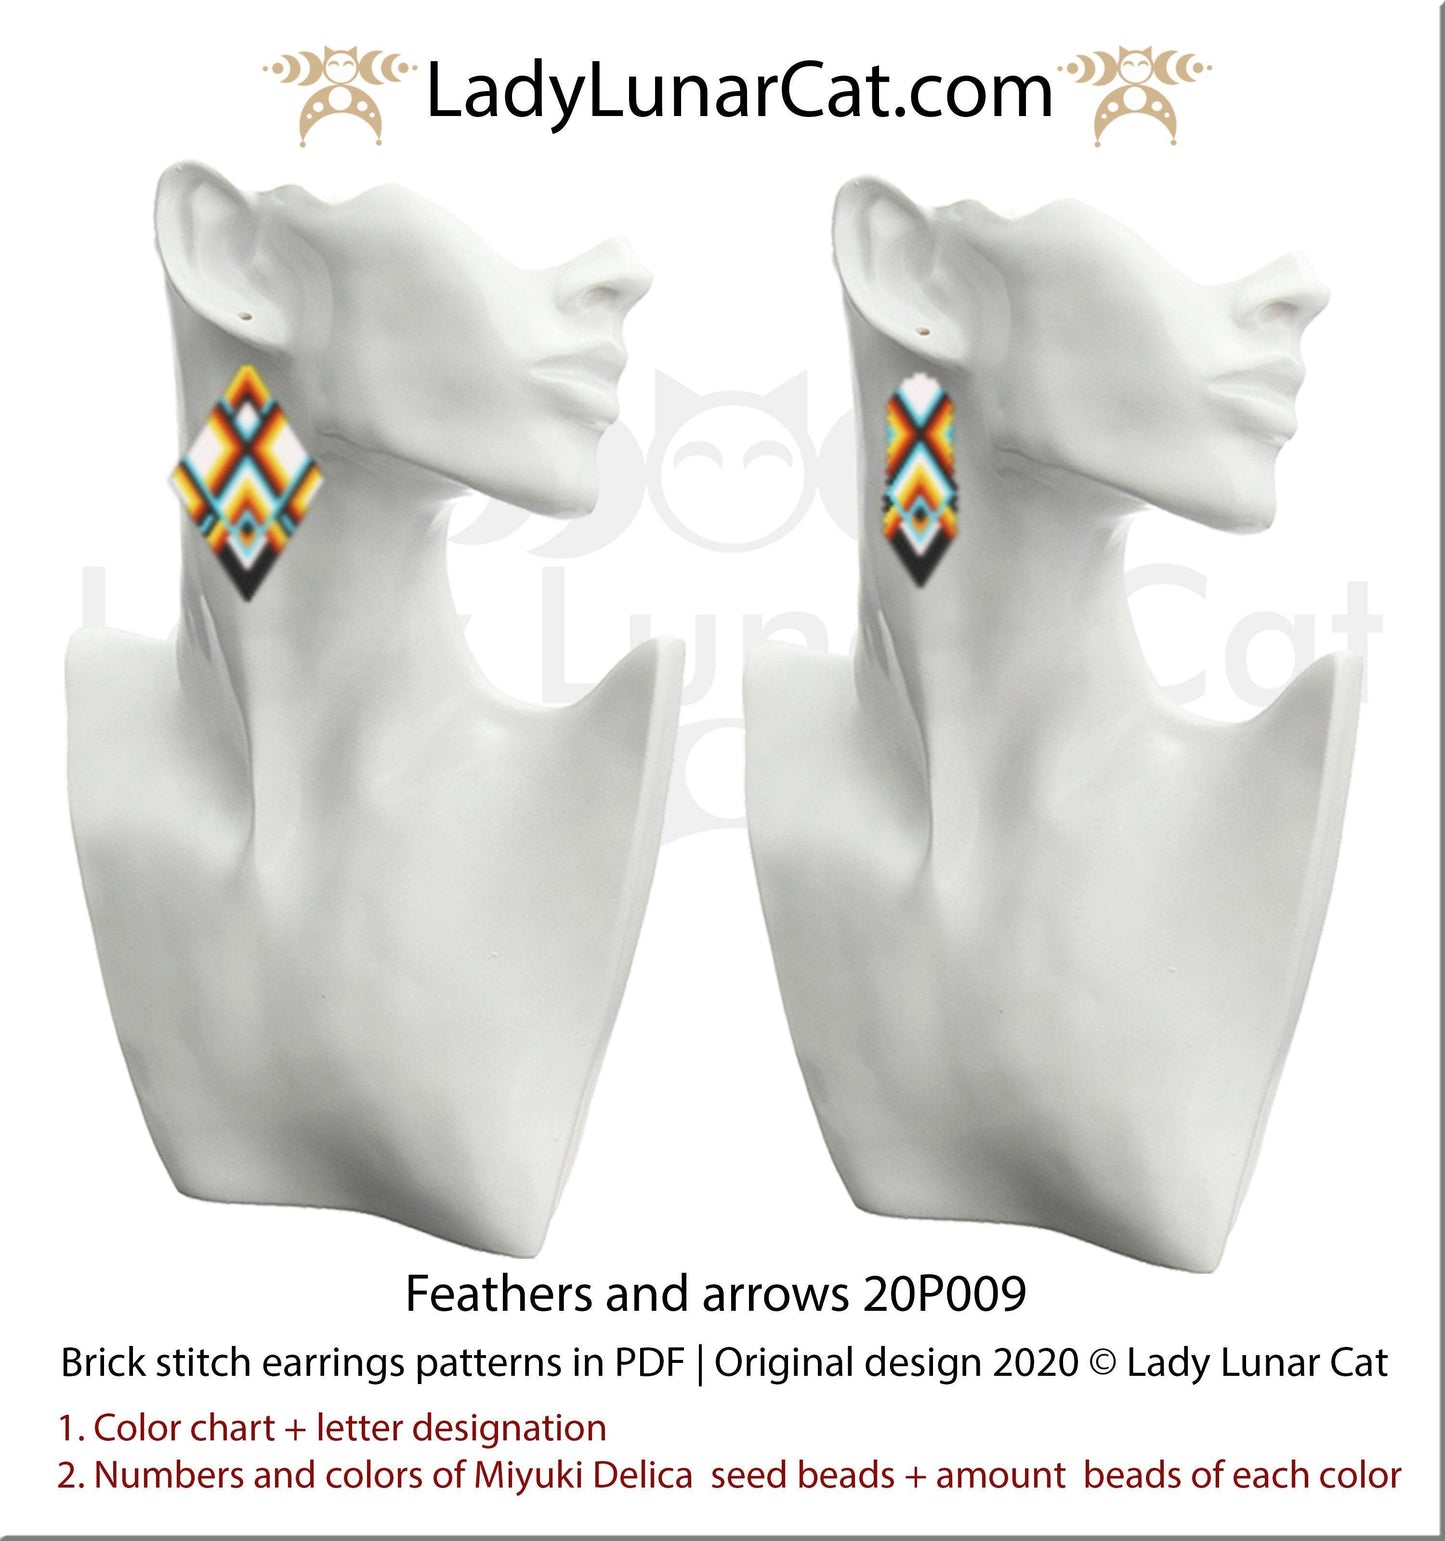 Brick stitch patterns for beading Feathers and arrows earrings 20P009 LadyLunarCat